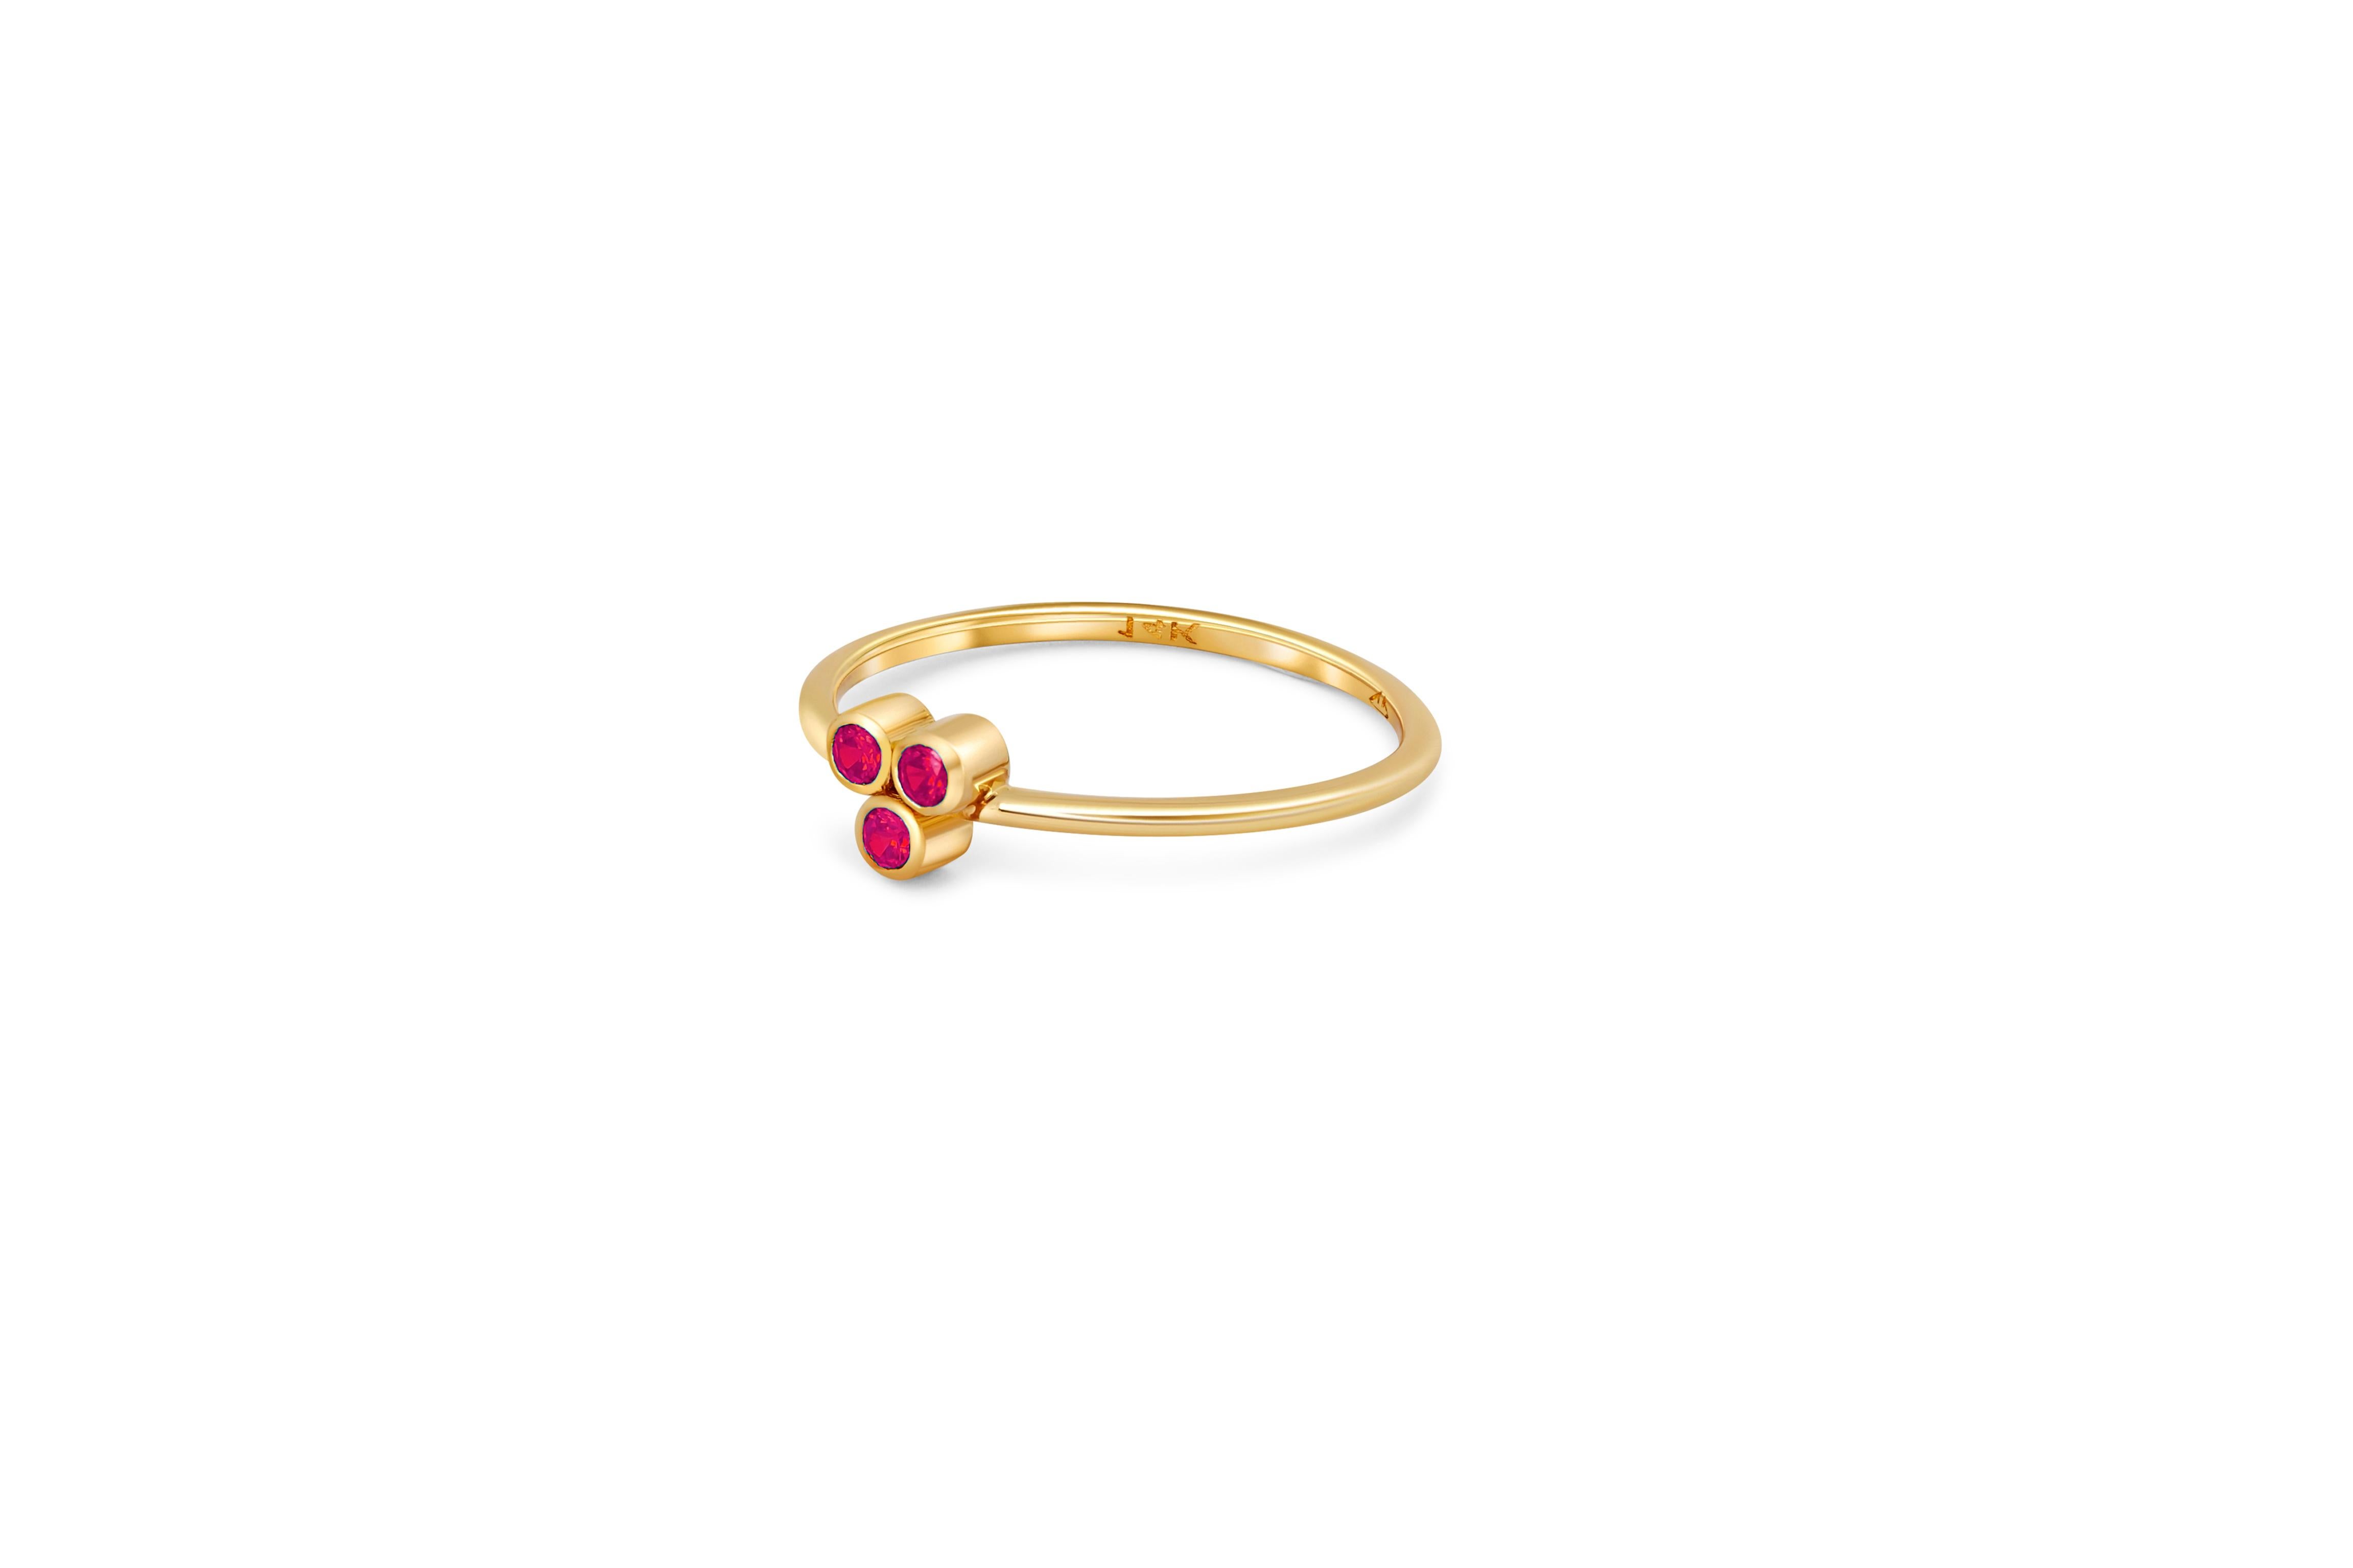 Three Stone 14k gold ring.  Triple Stone Ring. Minimalist  red lab ruby ring. Dainty gemstone Ring. Thin Band Ring. Stacking Band Ring.

Metal: 14k gold
Weight: 1.8 gr depends from size
Lab ruby, 3 stone, red color, round brilliant cut

auction